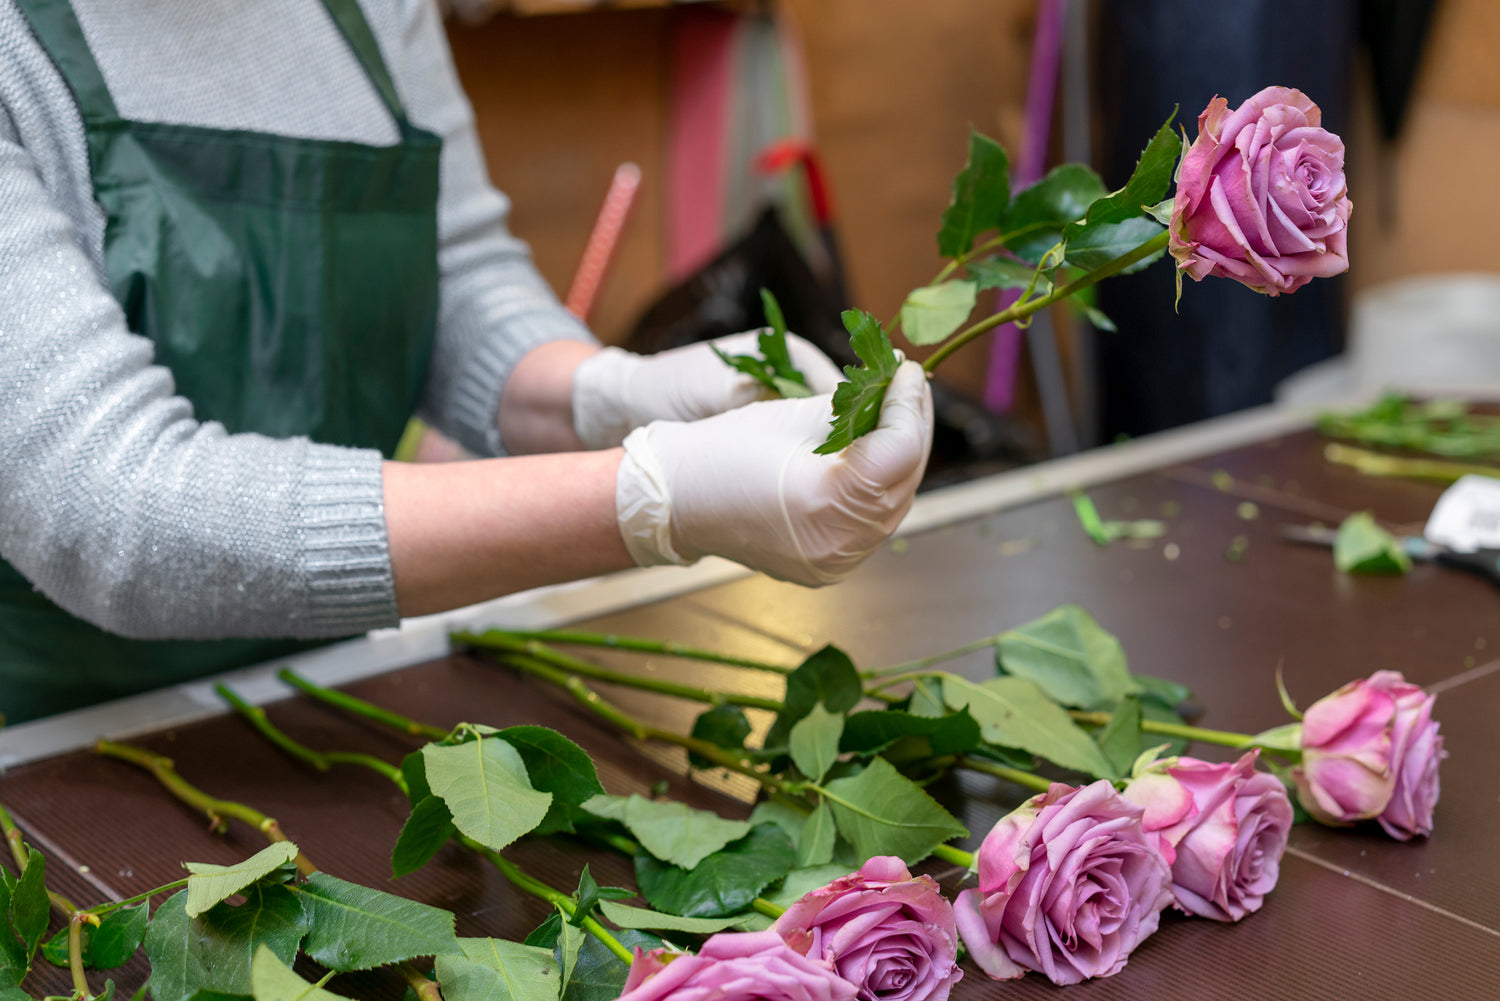 The photo shows a florist trimming the stems of purple roses for optimal care. To prolong their life, steps include choosing fresh roses, angled stem cuts for water uptake, leaf removal to hinder bacteria, and using a vase with water and flower food.